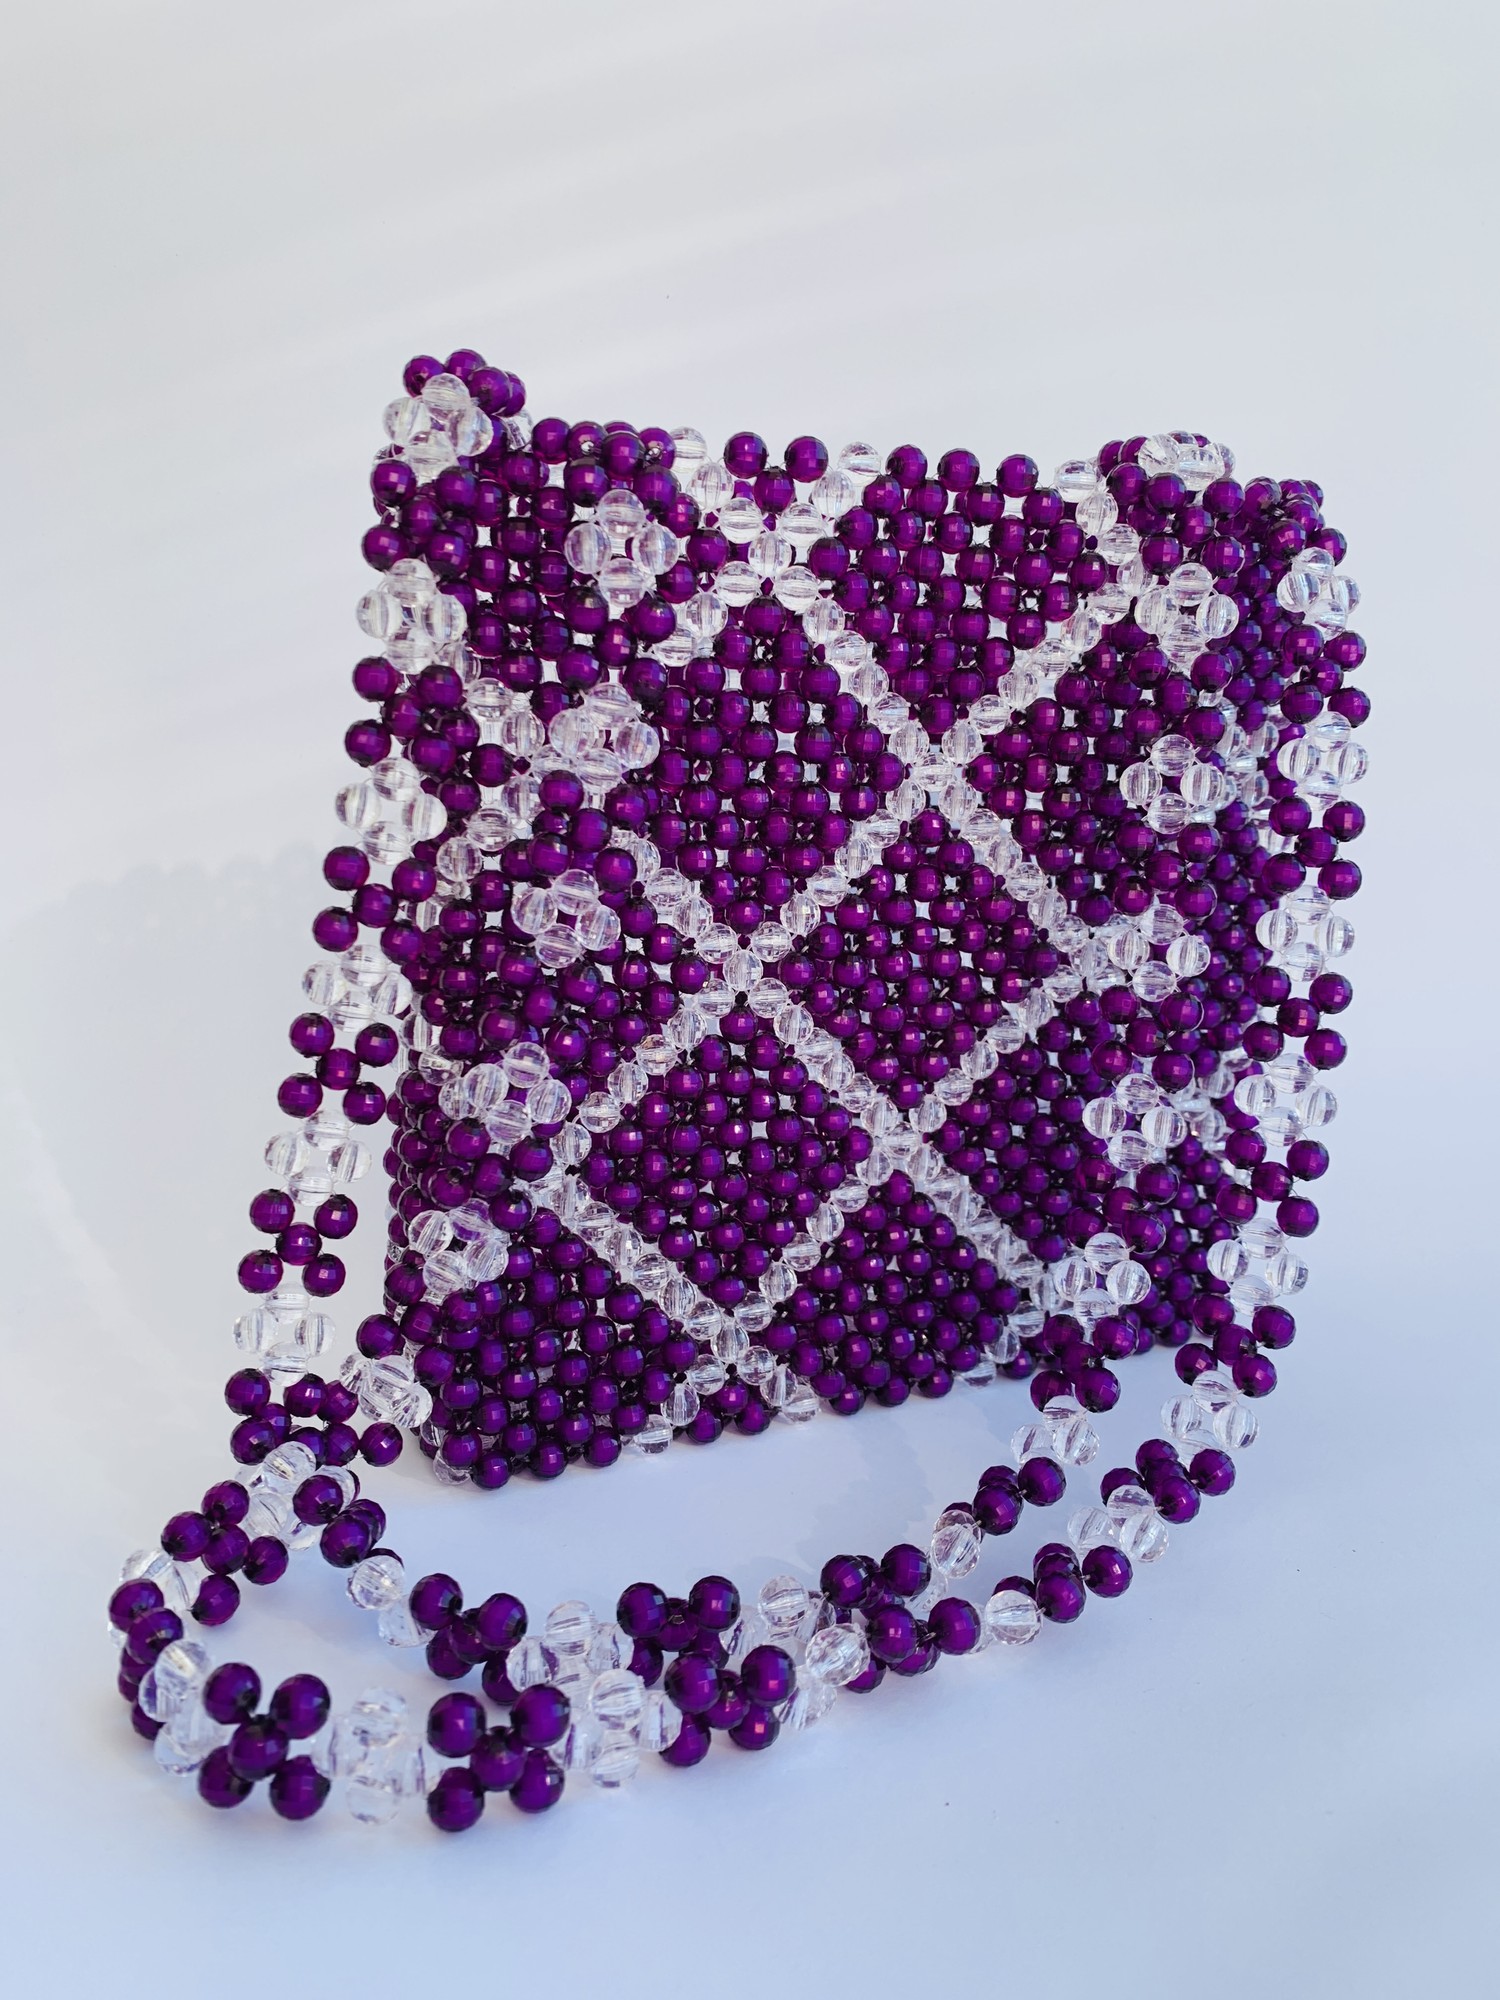 women's stylish bag. decoration for the image. bag made of beads. a gift for a girl